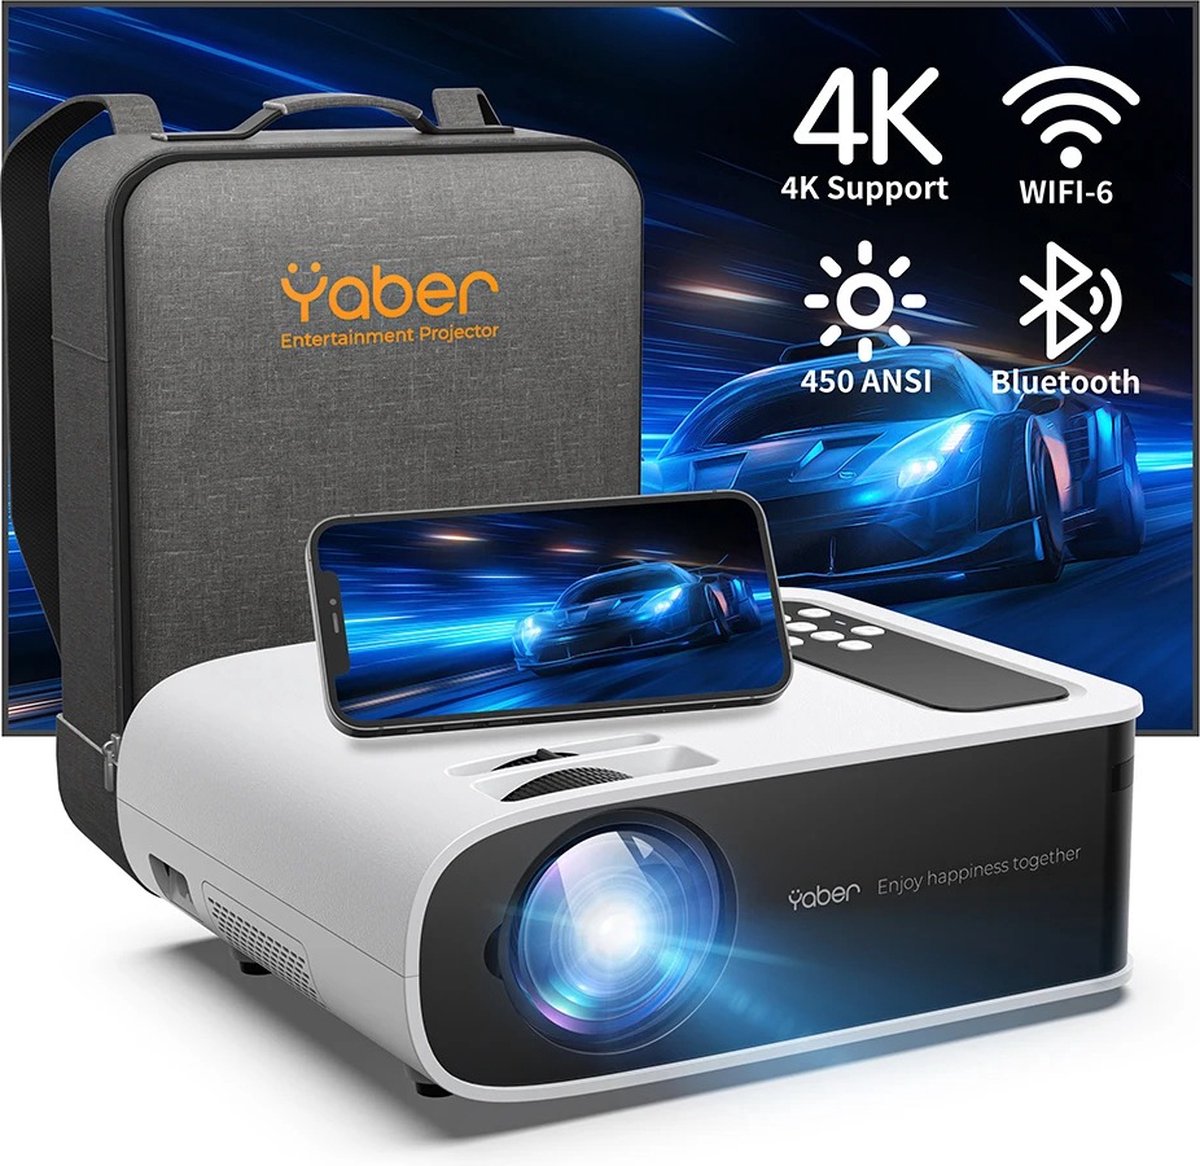 Empire's Product 4K Projector Met Wifi 6 - Mini Beamer - Bluetooth 5.0 - IOS & Android - Home Video Projector